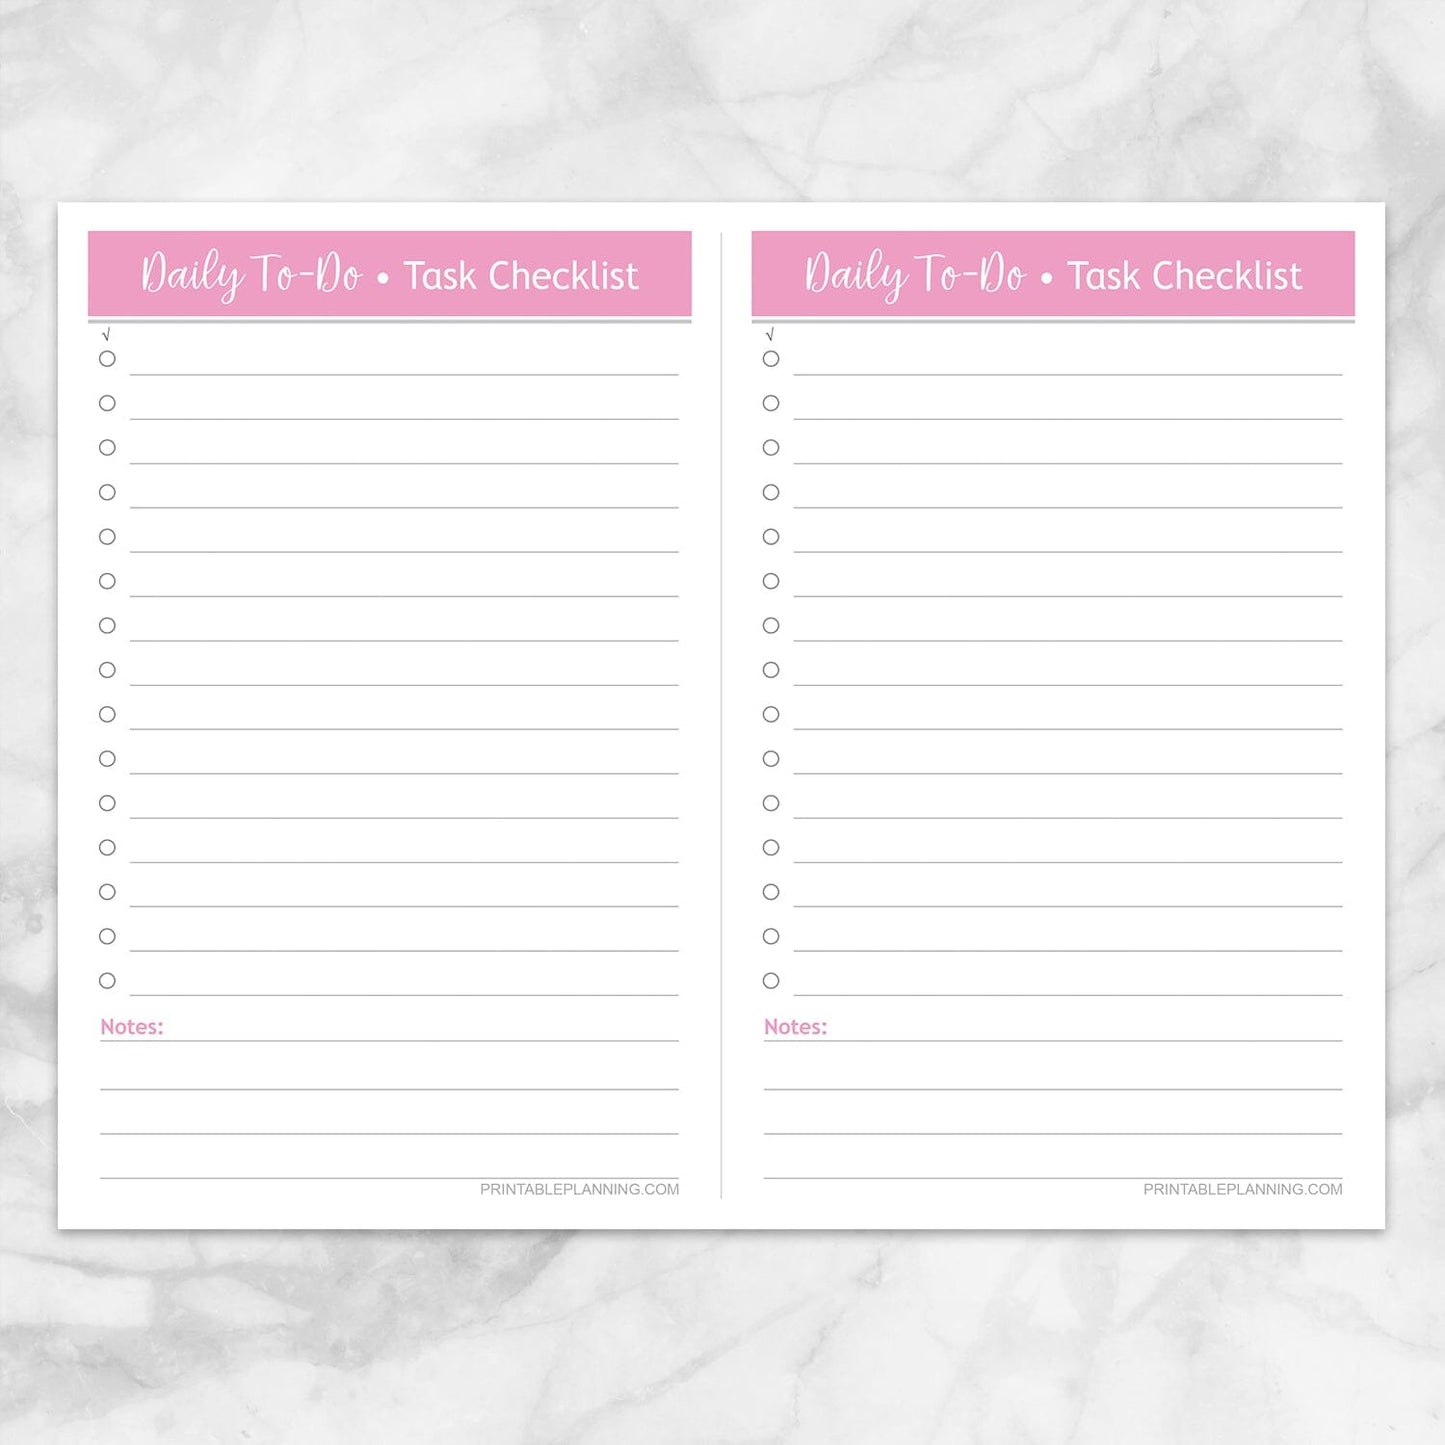 Printable Daily To-Do Lists - 2 Per Page - Task Checklists in Pink at Printable Planning.